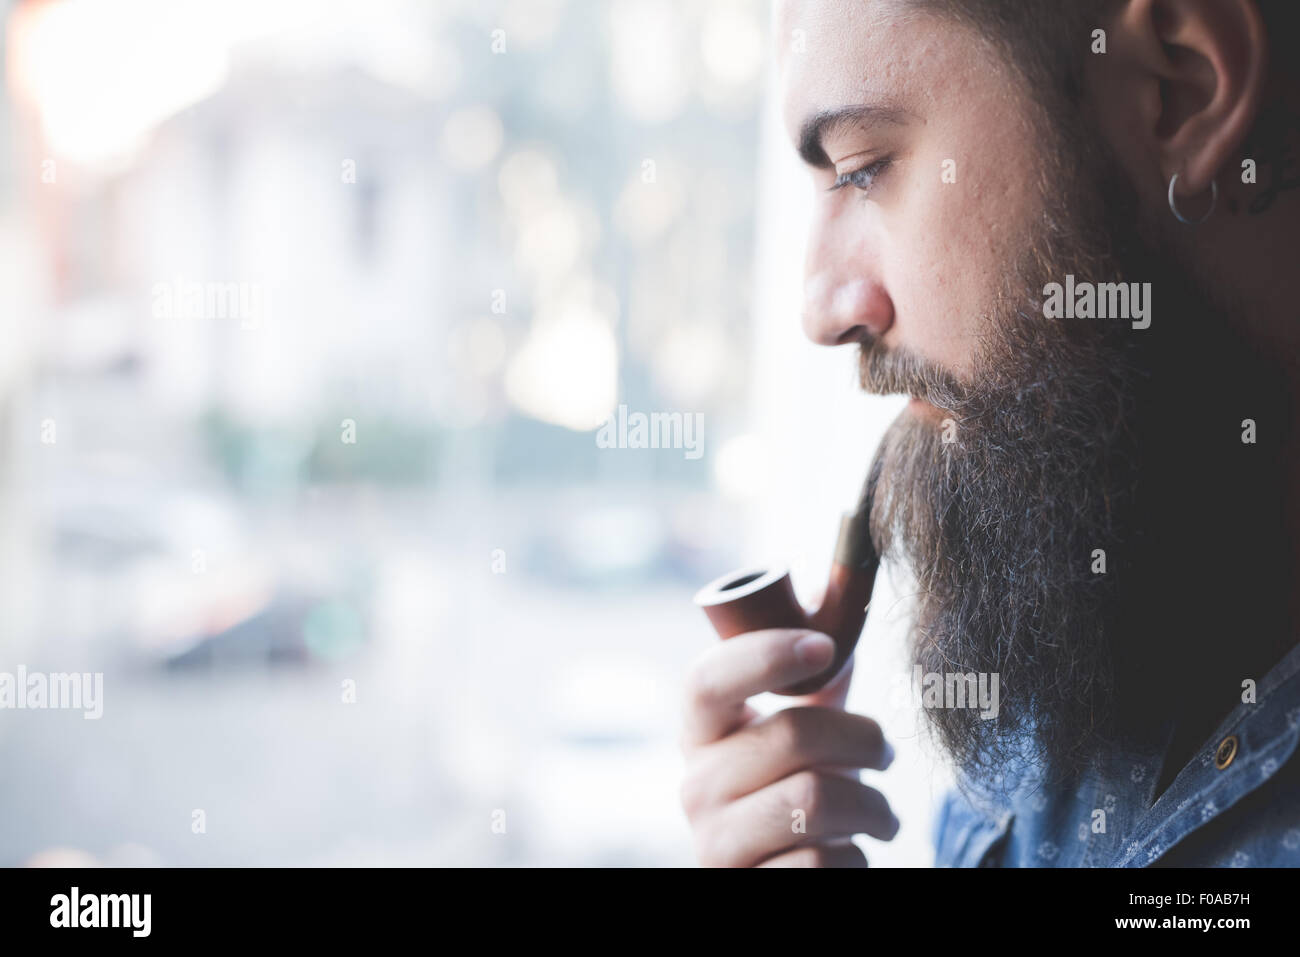 Young bearded man smoking pipe by window Stock Photo